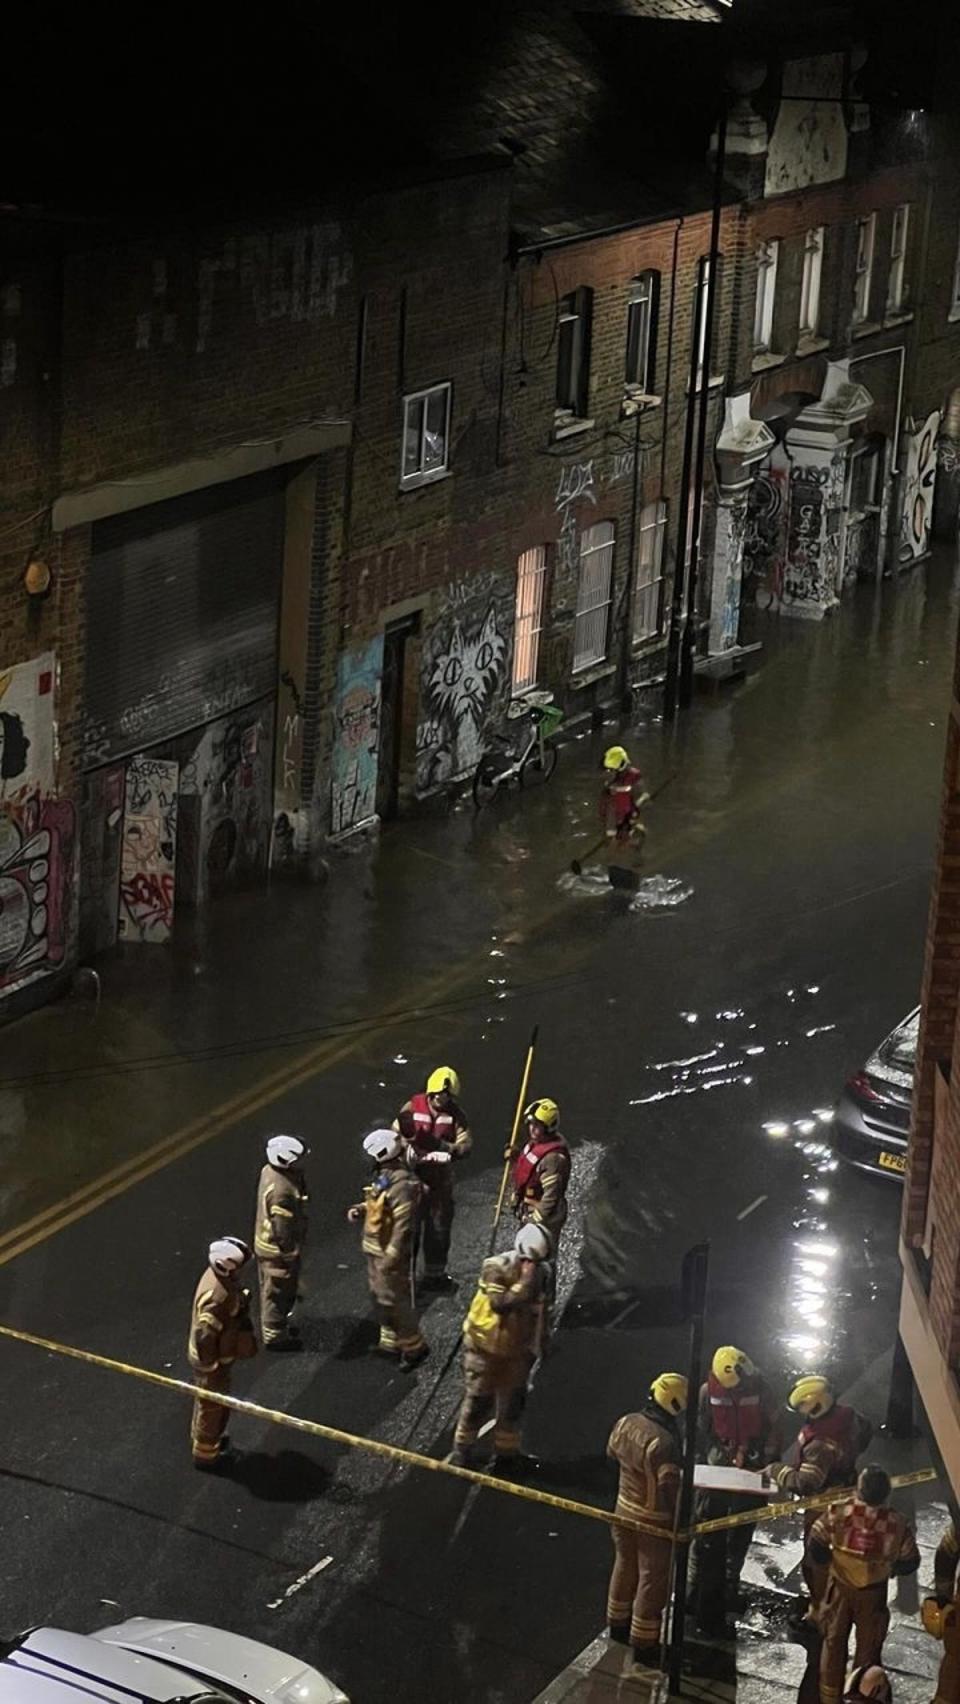 Hackney Wick in east London flooded in the wet weather on Thursday (Simon Goode)